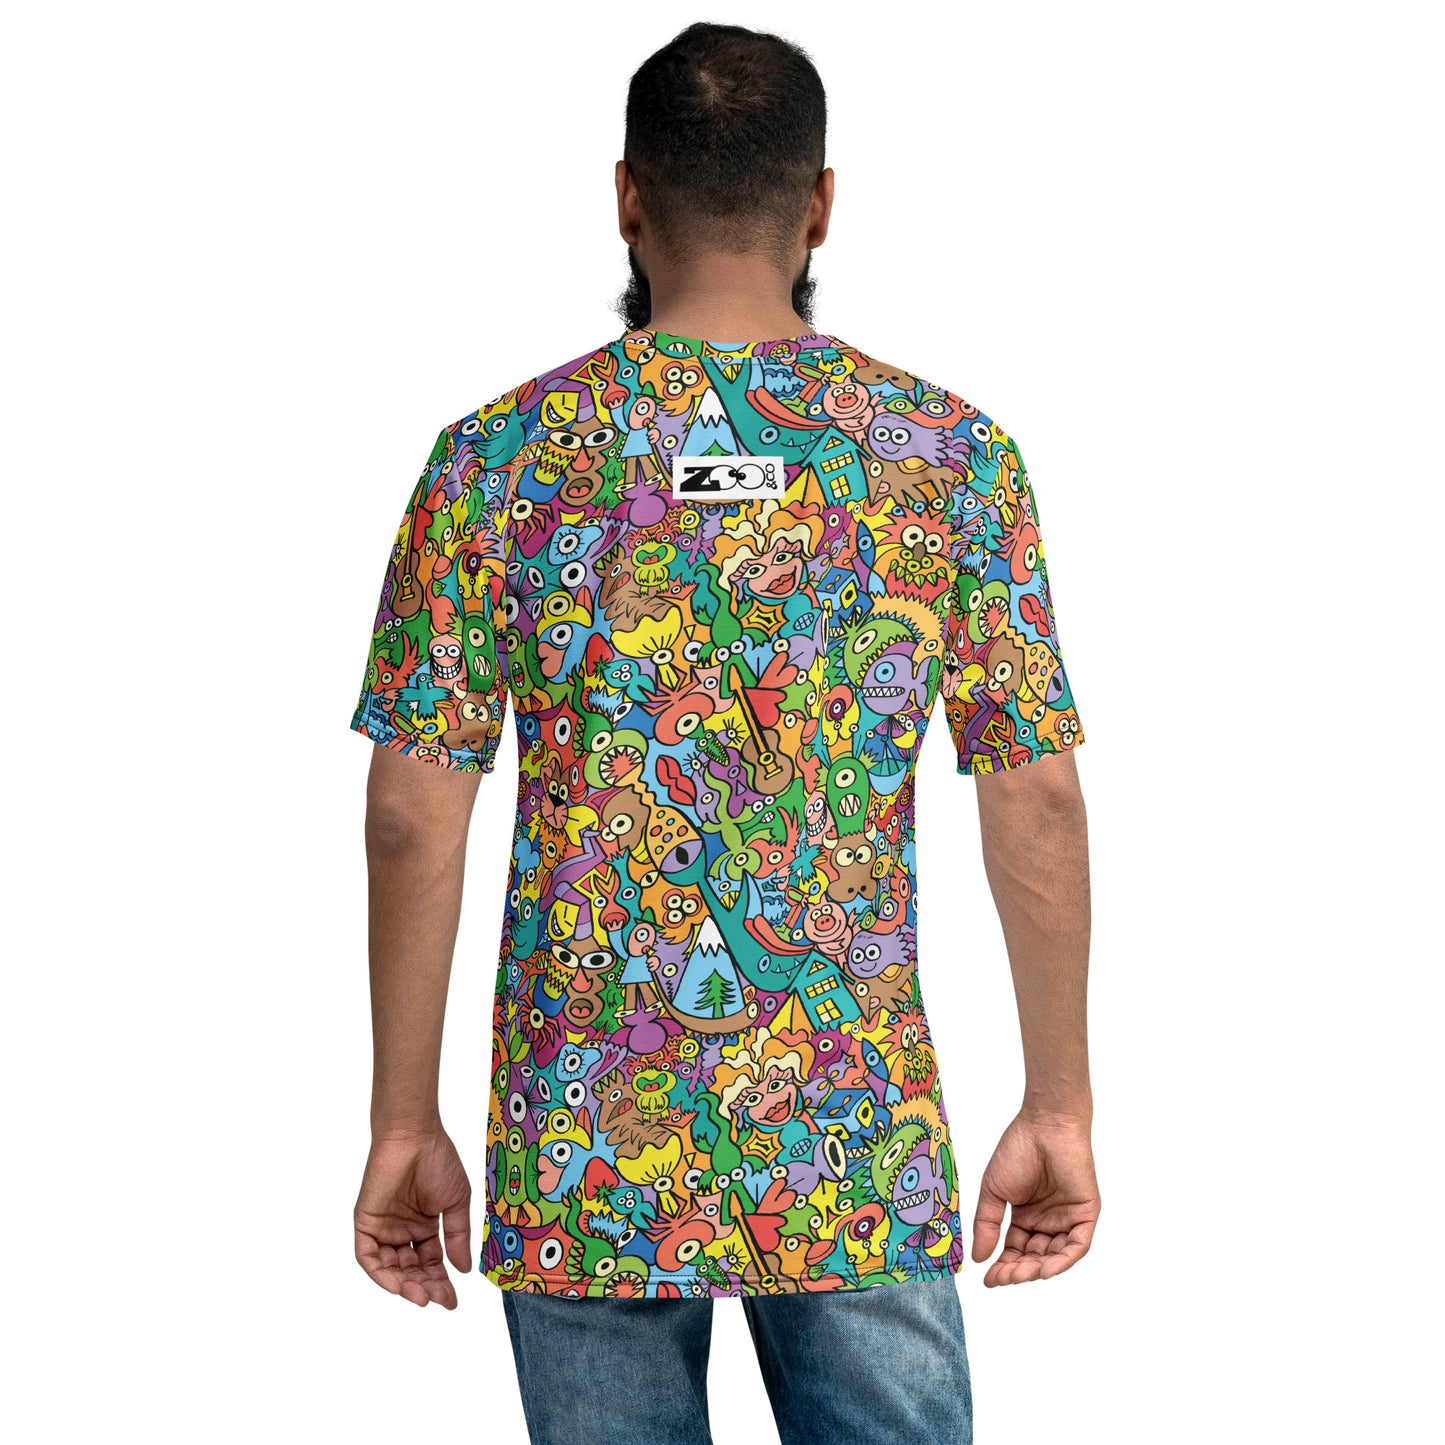 Cheerful crowd enjoying a lively carnival Men's T-shirt. Back view